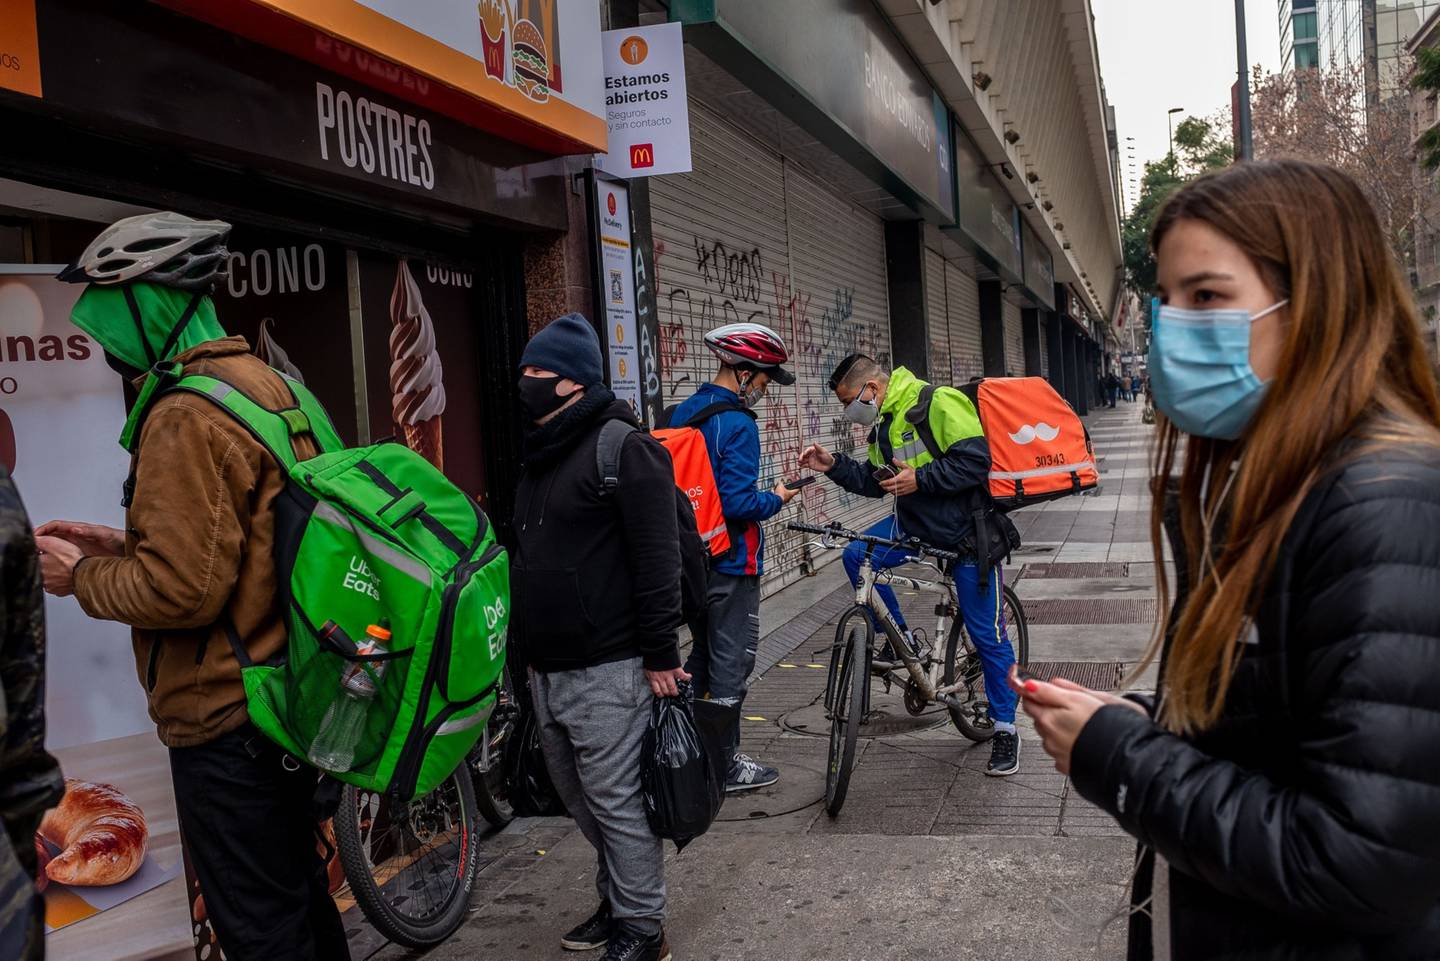 Delivery workers wait outside to pick up food orders in Santiago, Chile, on Monday, July 27, 2020. President Sebastian Pinera signed a bill into law late Friday allowing Chileans to withdraw retirement savings, following scenes of citizens lining up by the thousands outside pension fund offices. Photographer: Cristobal Olivares/Bloomberg